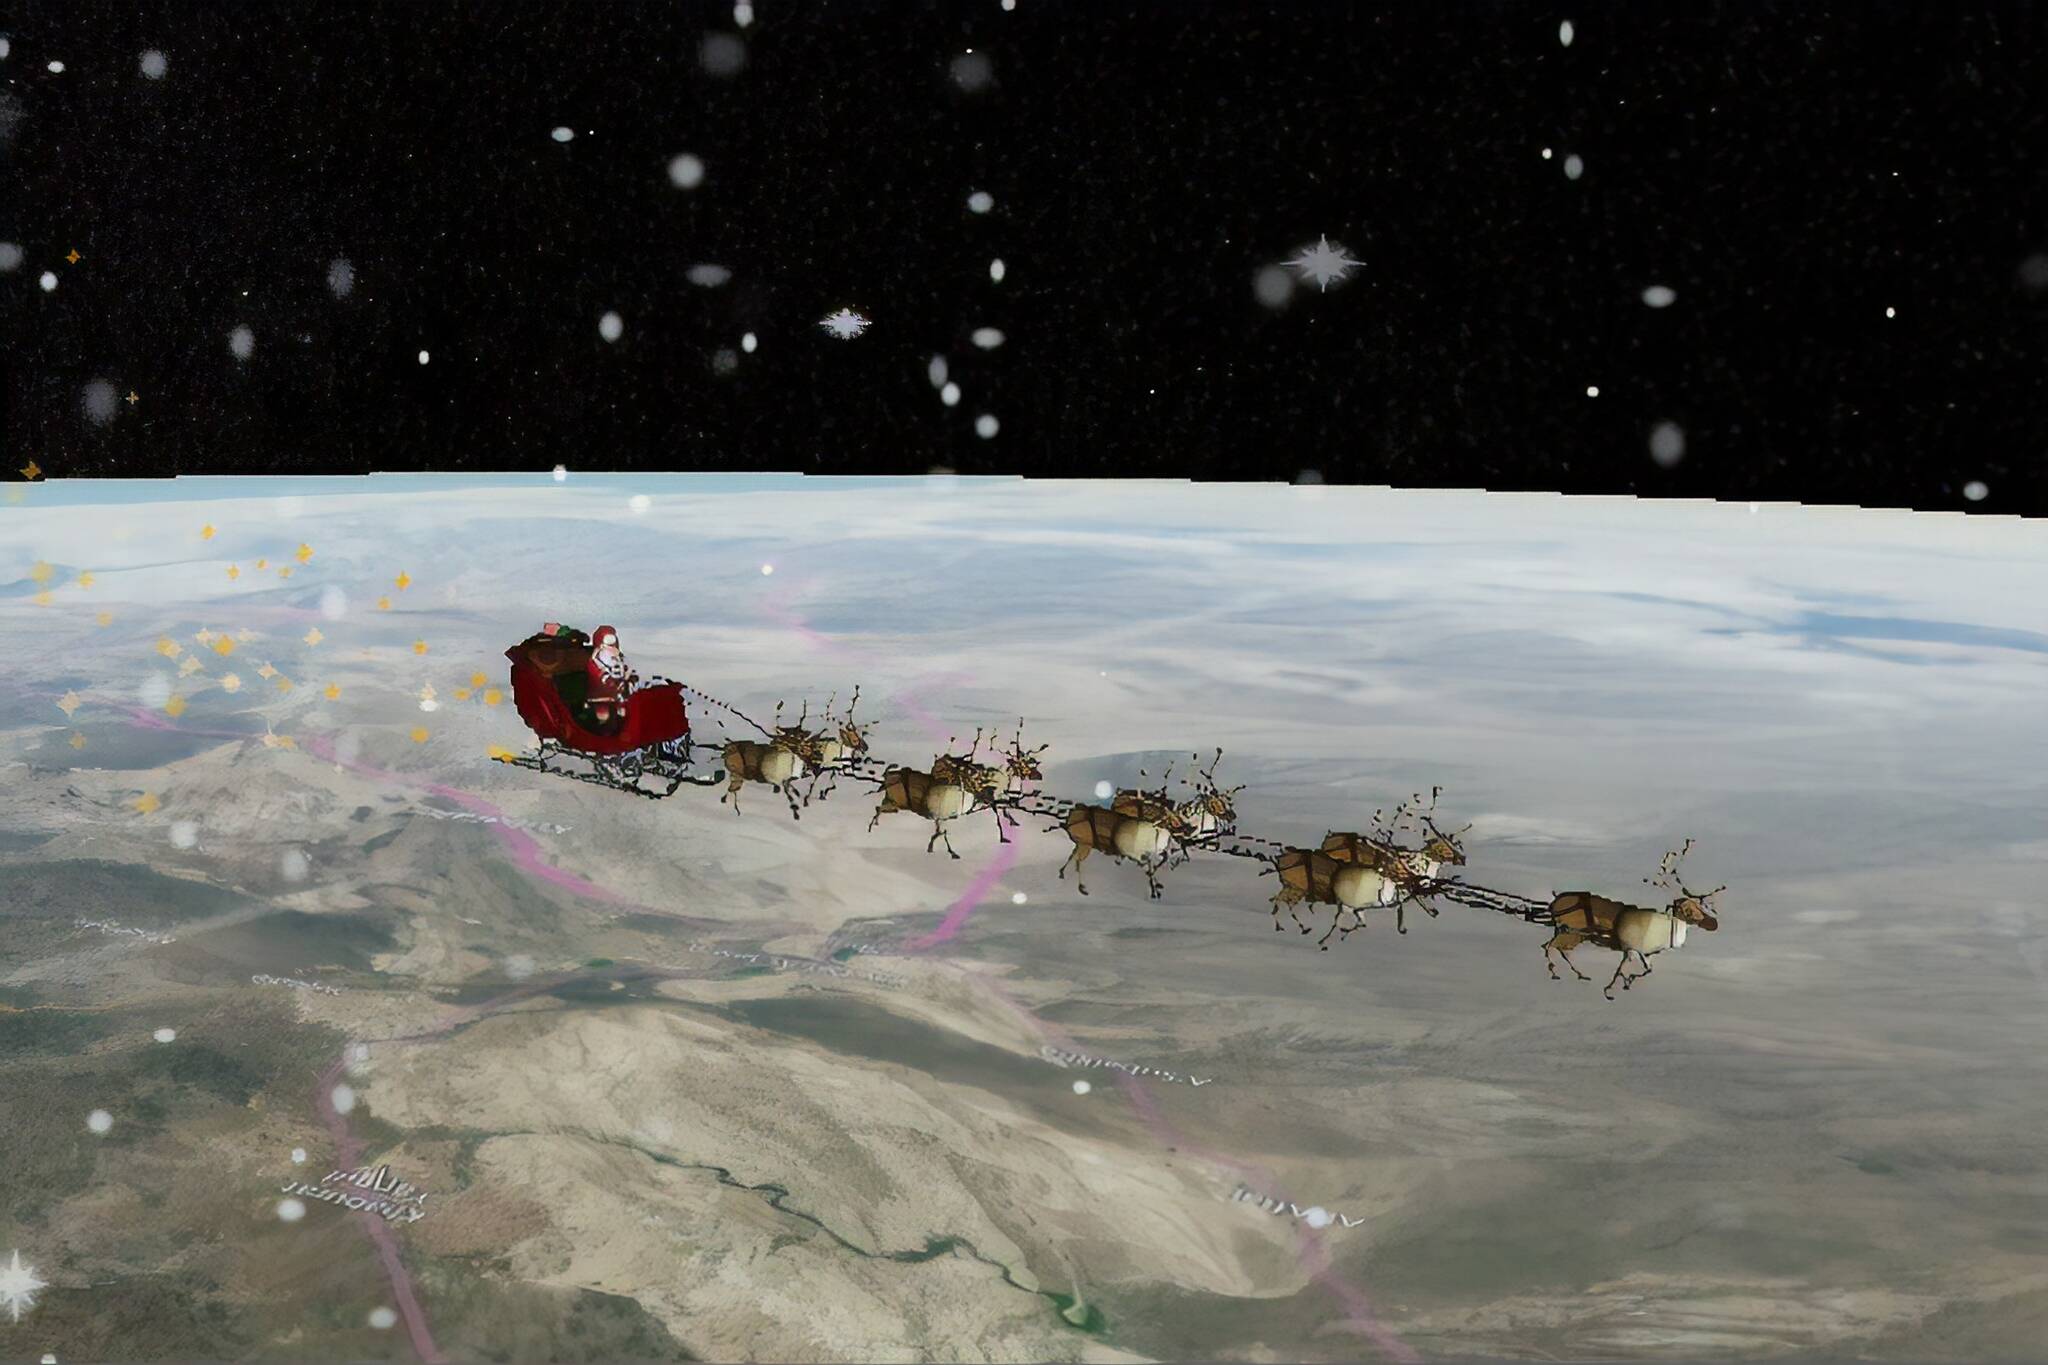 Here's how to watch the NORAD Santa tracker for 2020